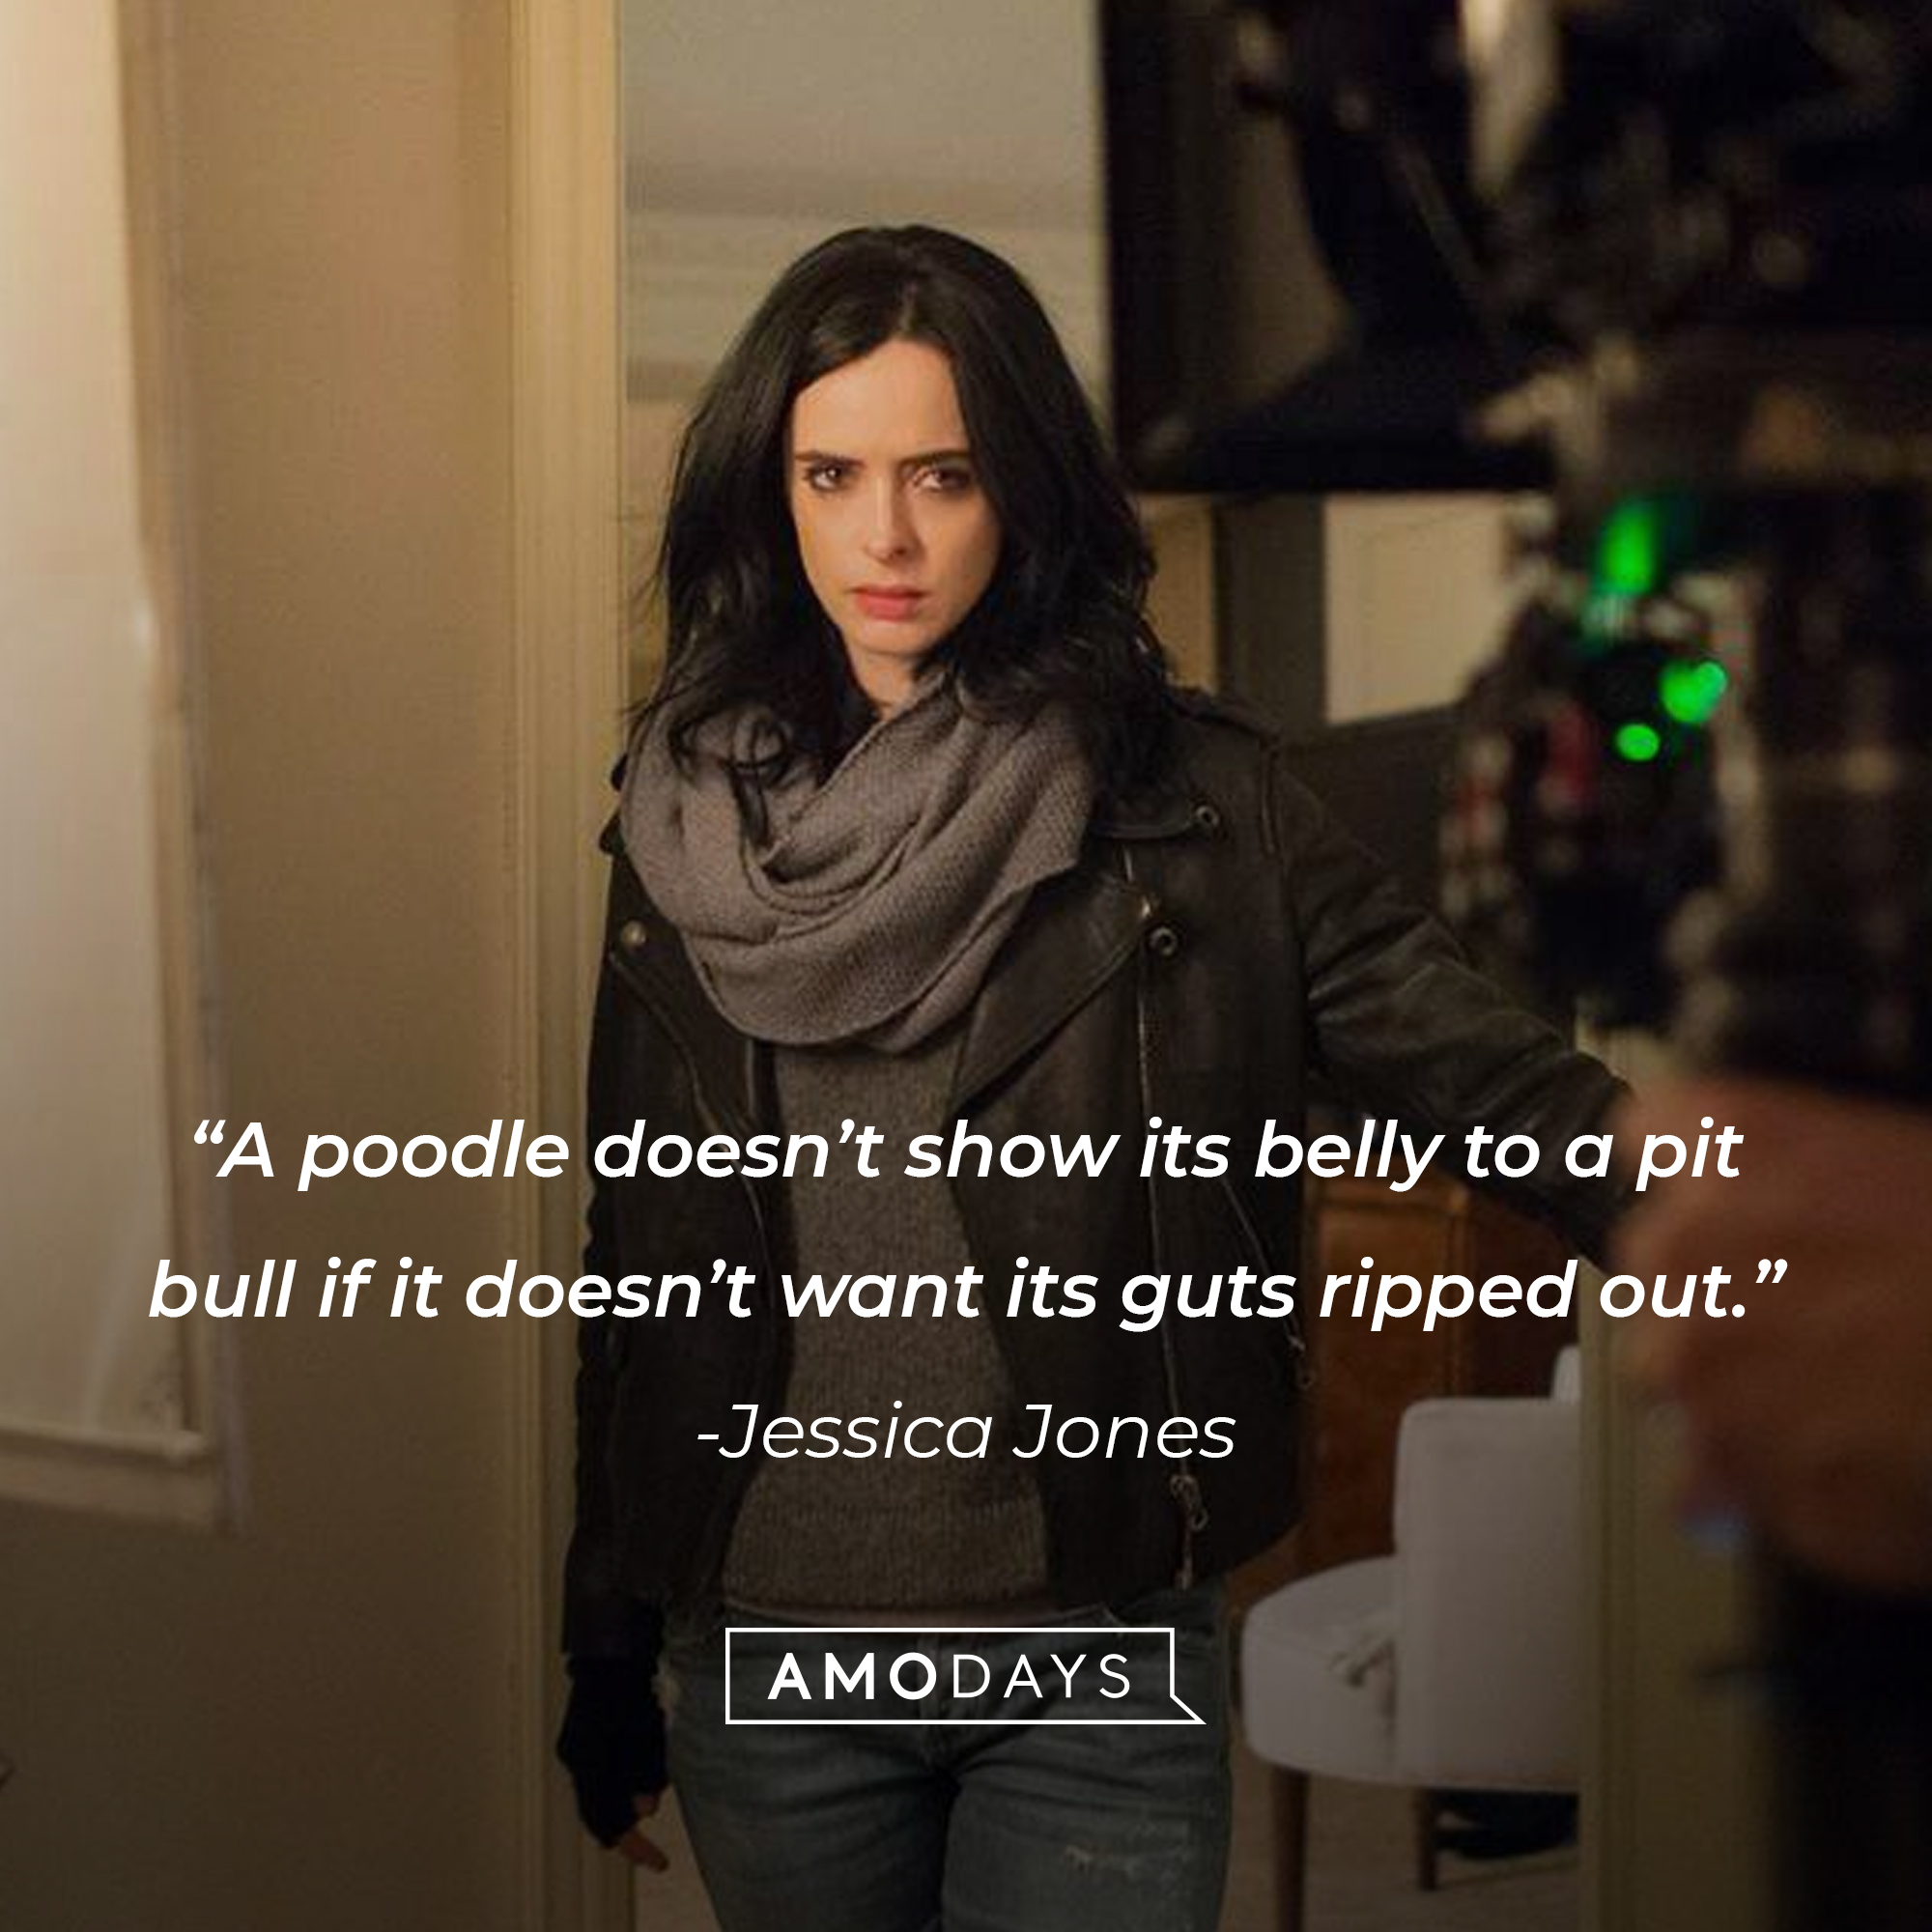 An image of Jessica Jones with her quote: “A poodle doesn’t show its belly to a pit bull if it doesn’t want its guts ripped out.”┃Source:facebook.com/JessicaJonesLat